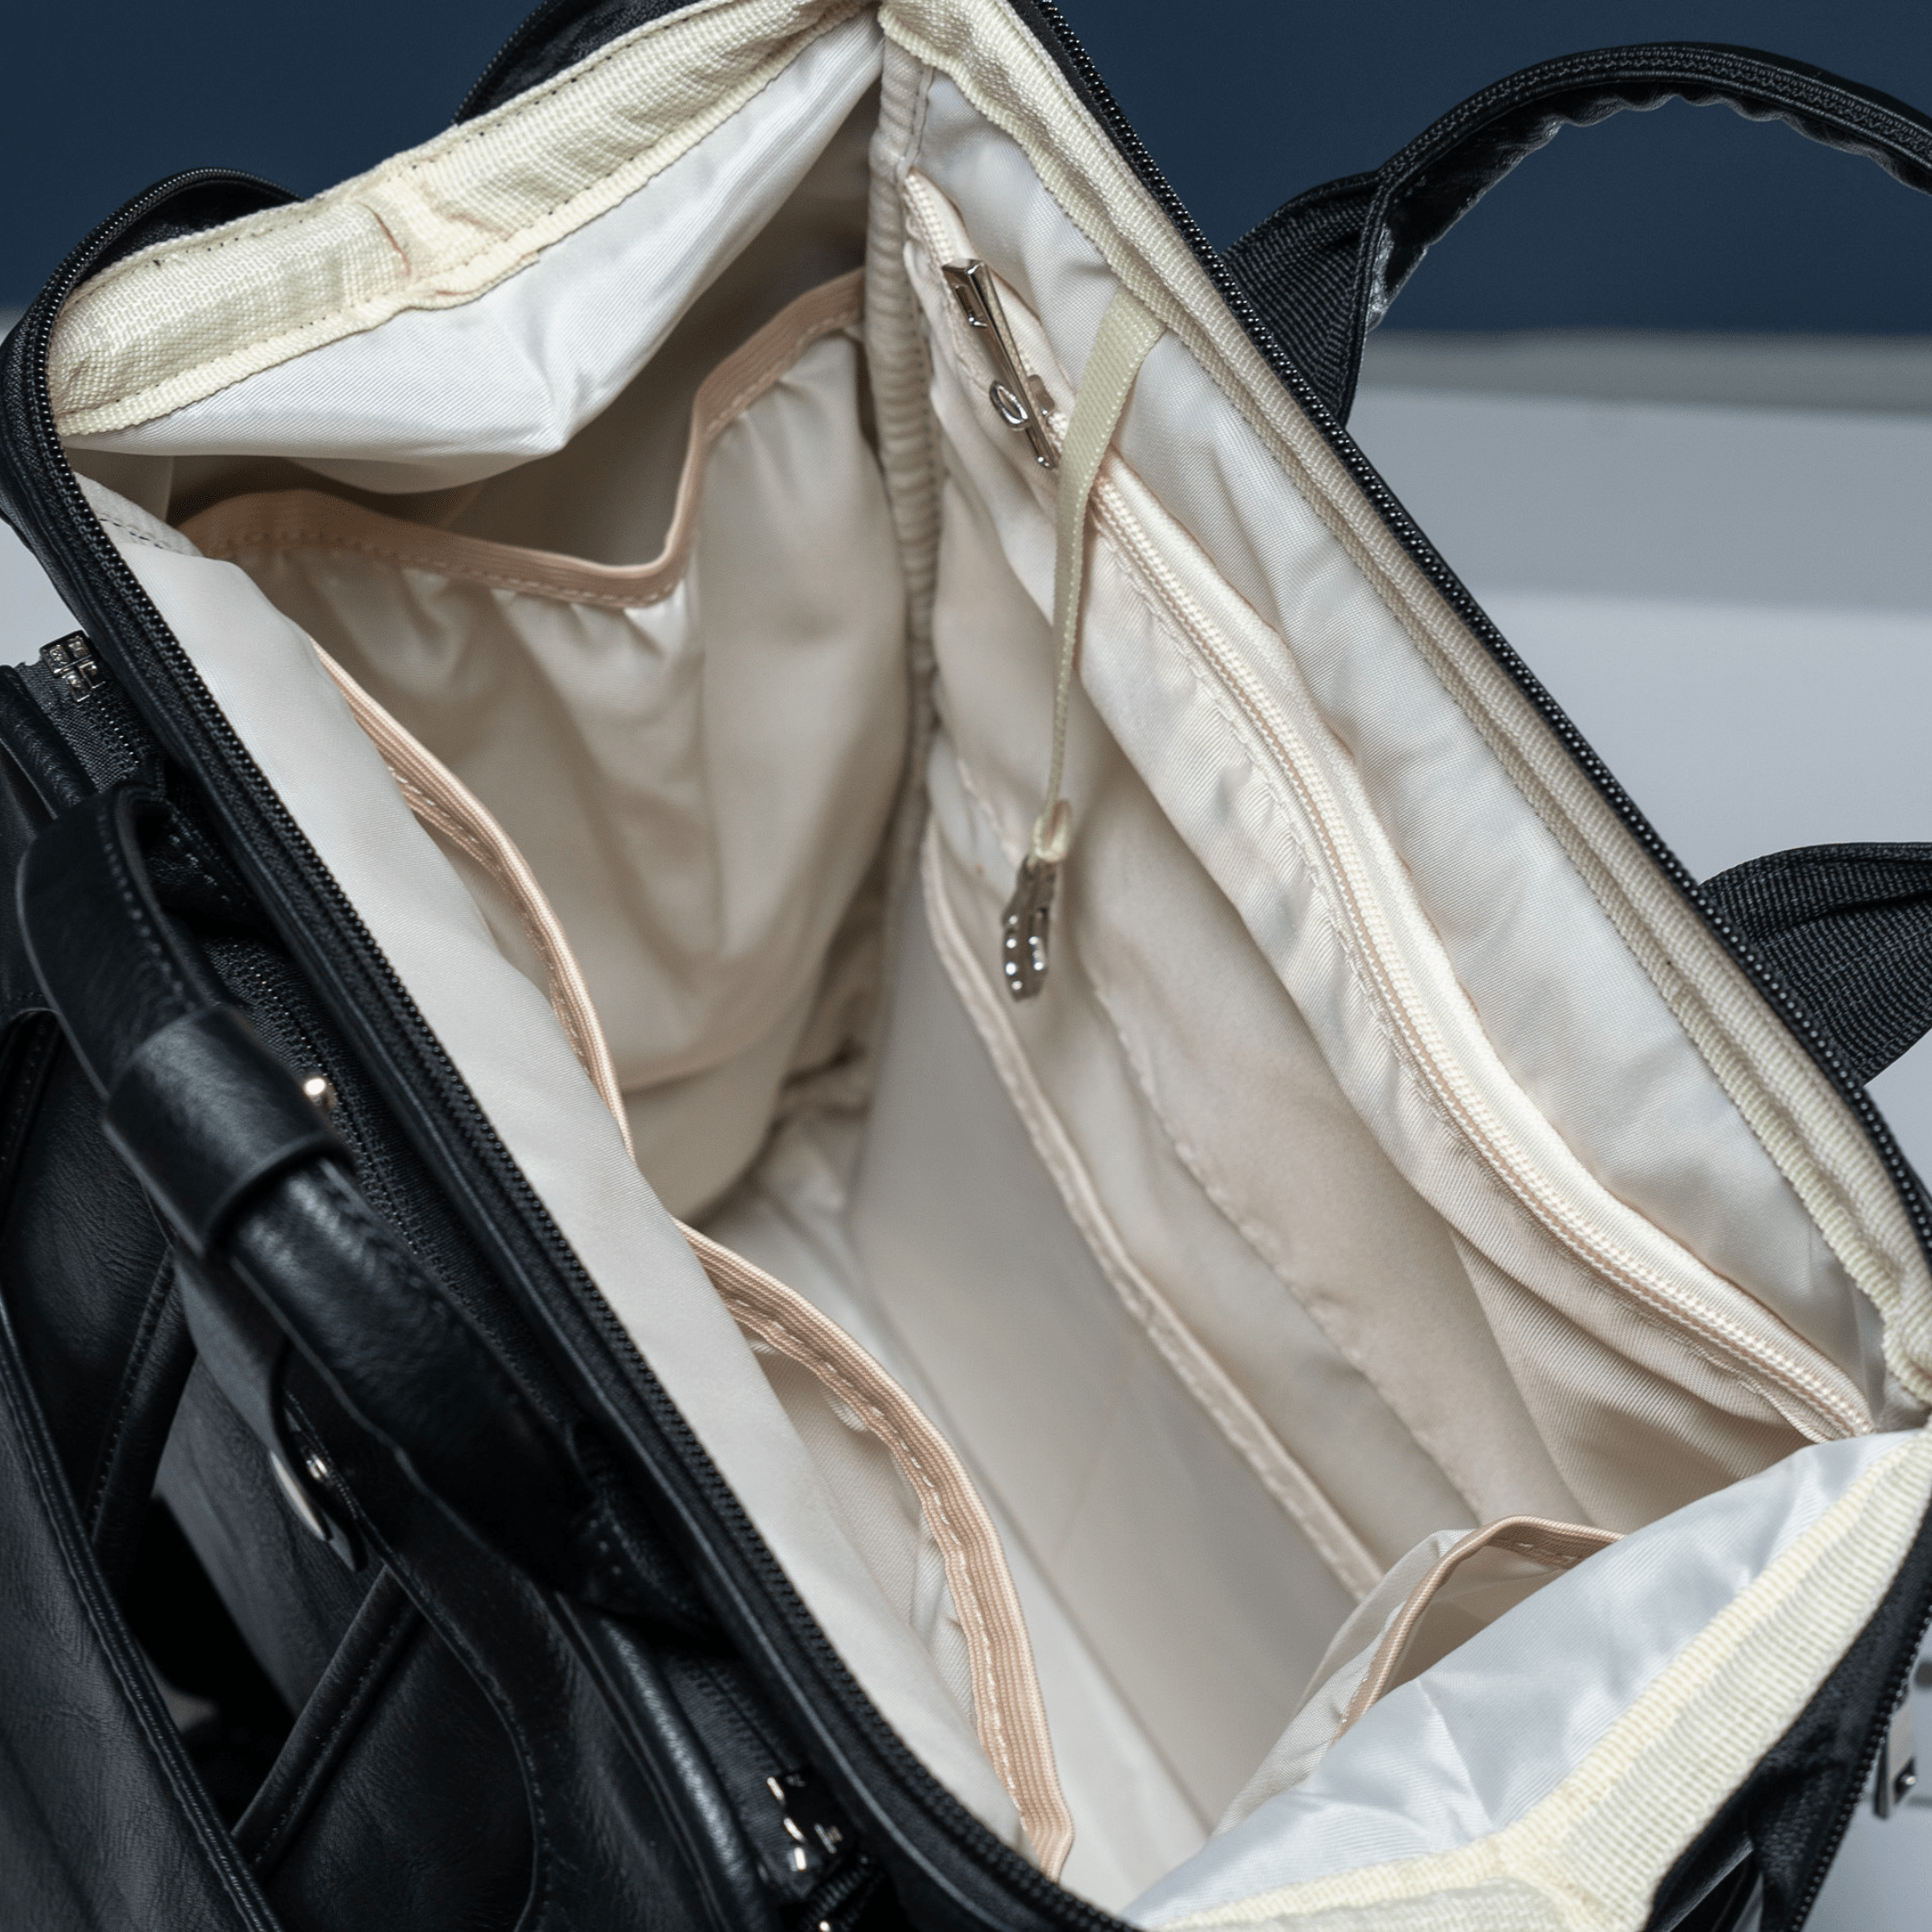 The Plush And Stylish Diaper Bag by Freshly Picked